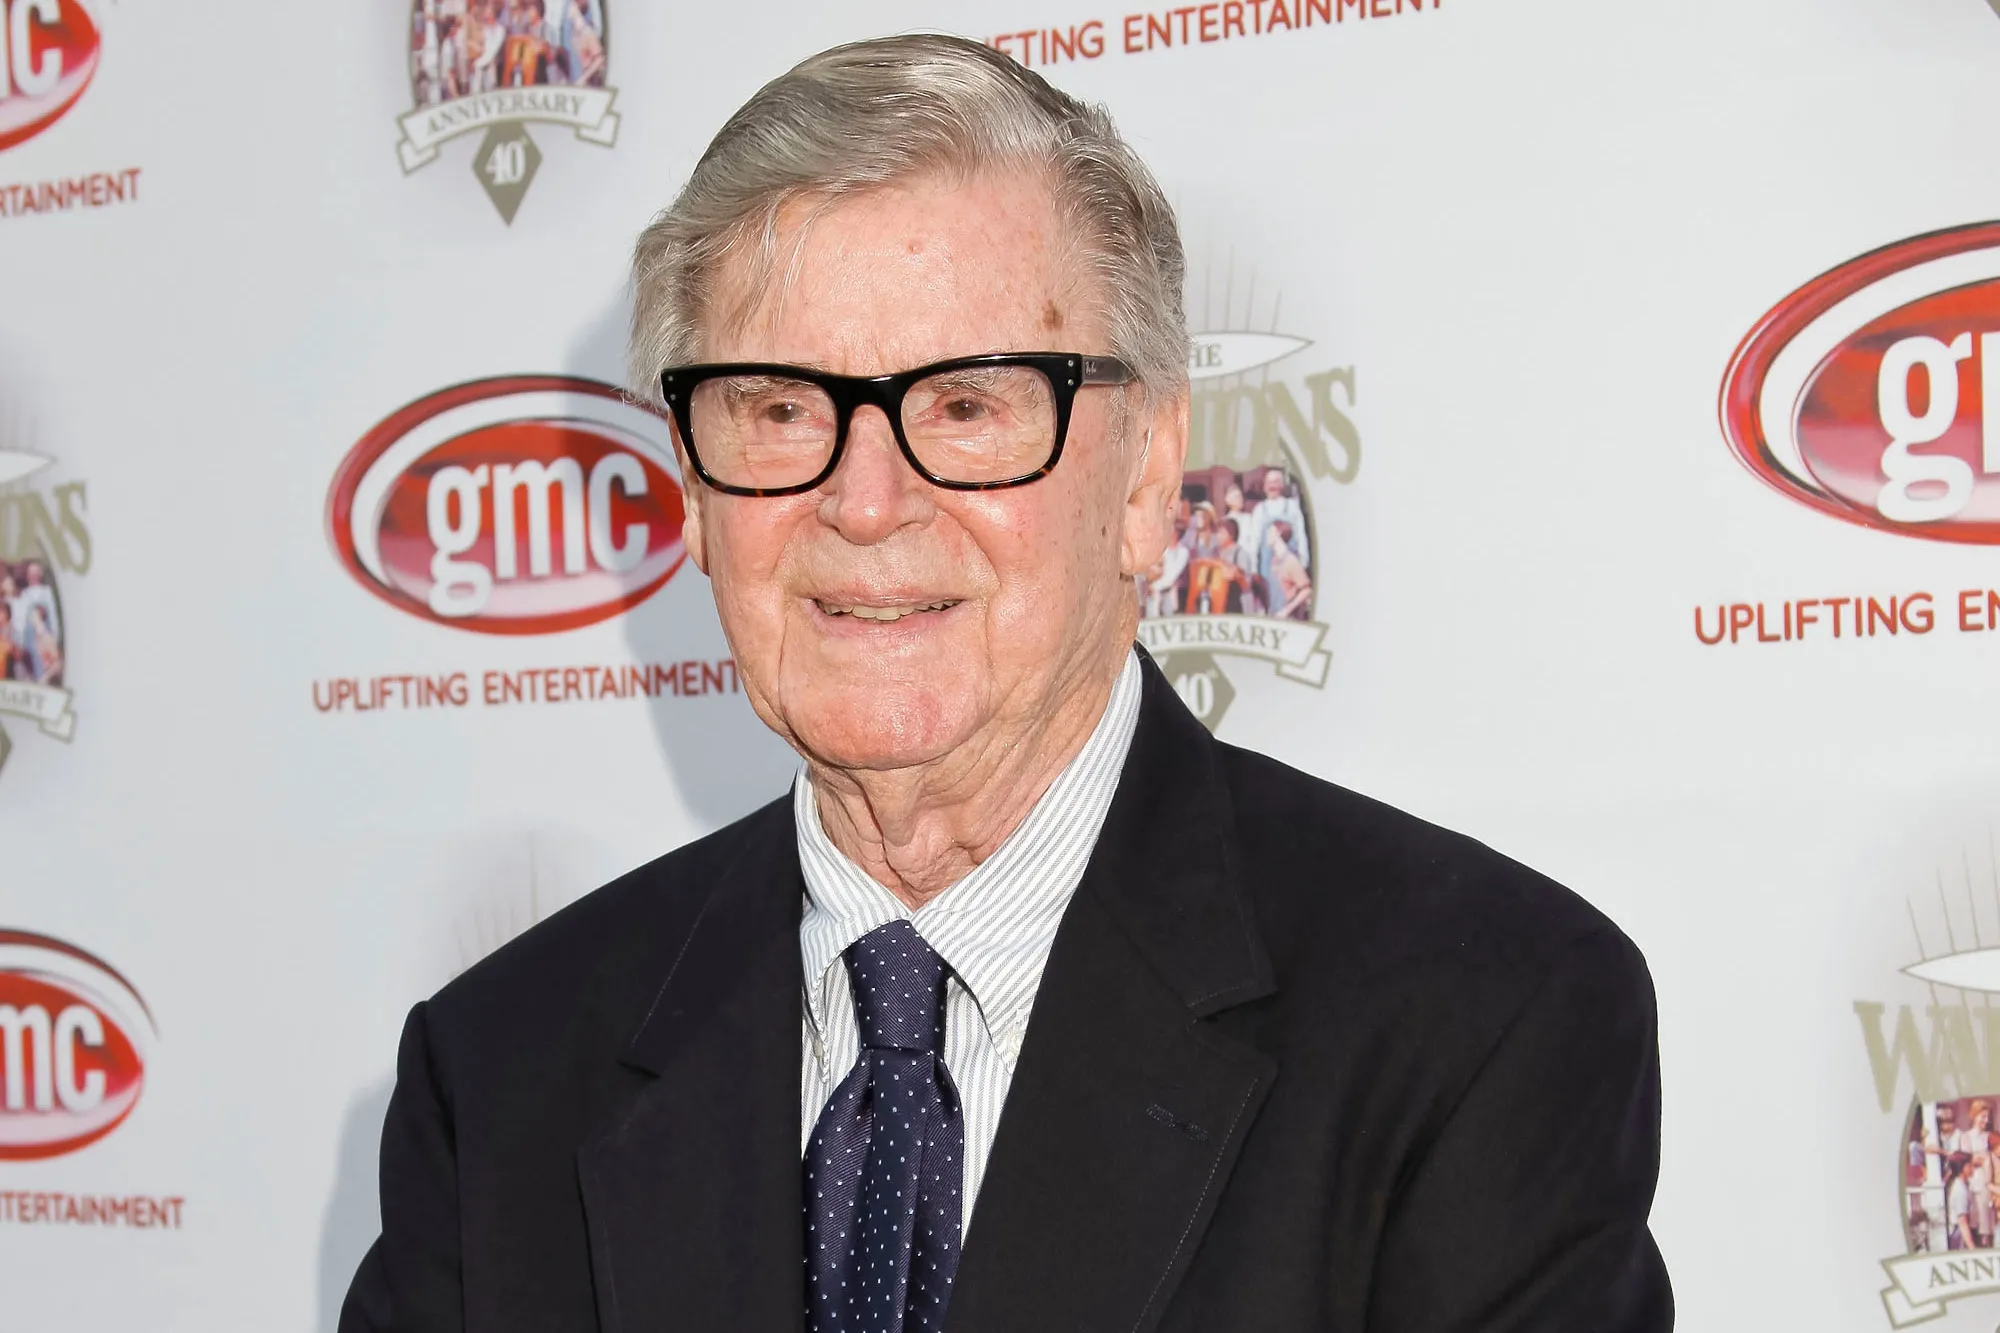 "The Waltons" Creator Earl Hamner Jr., the Actor, Said the Family is the Same